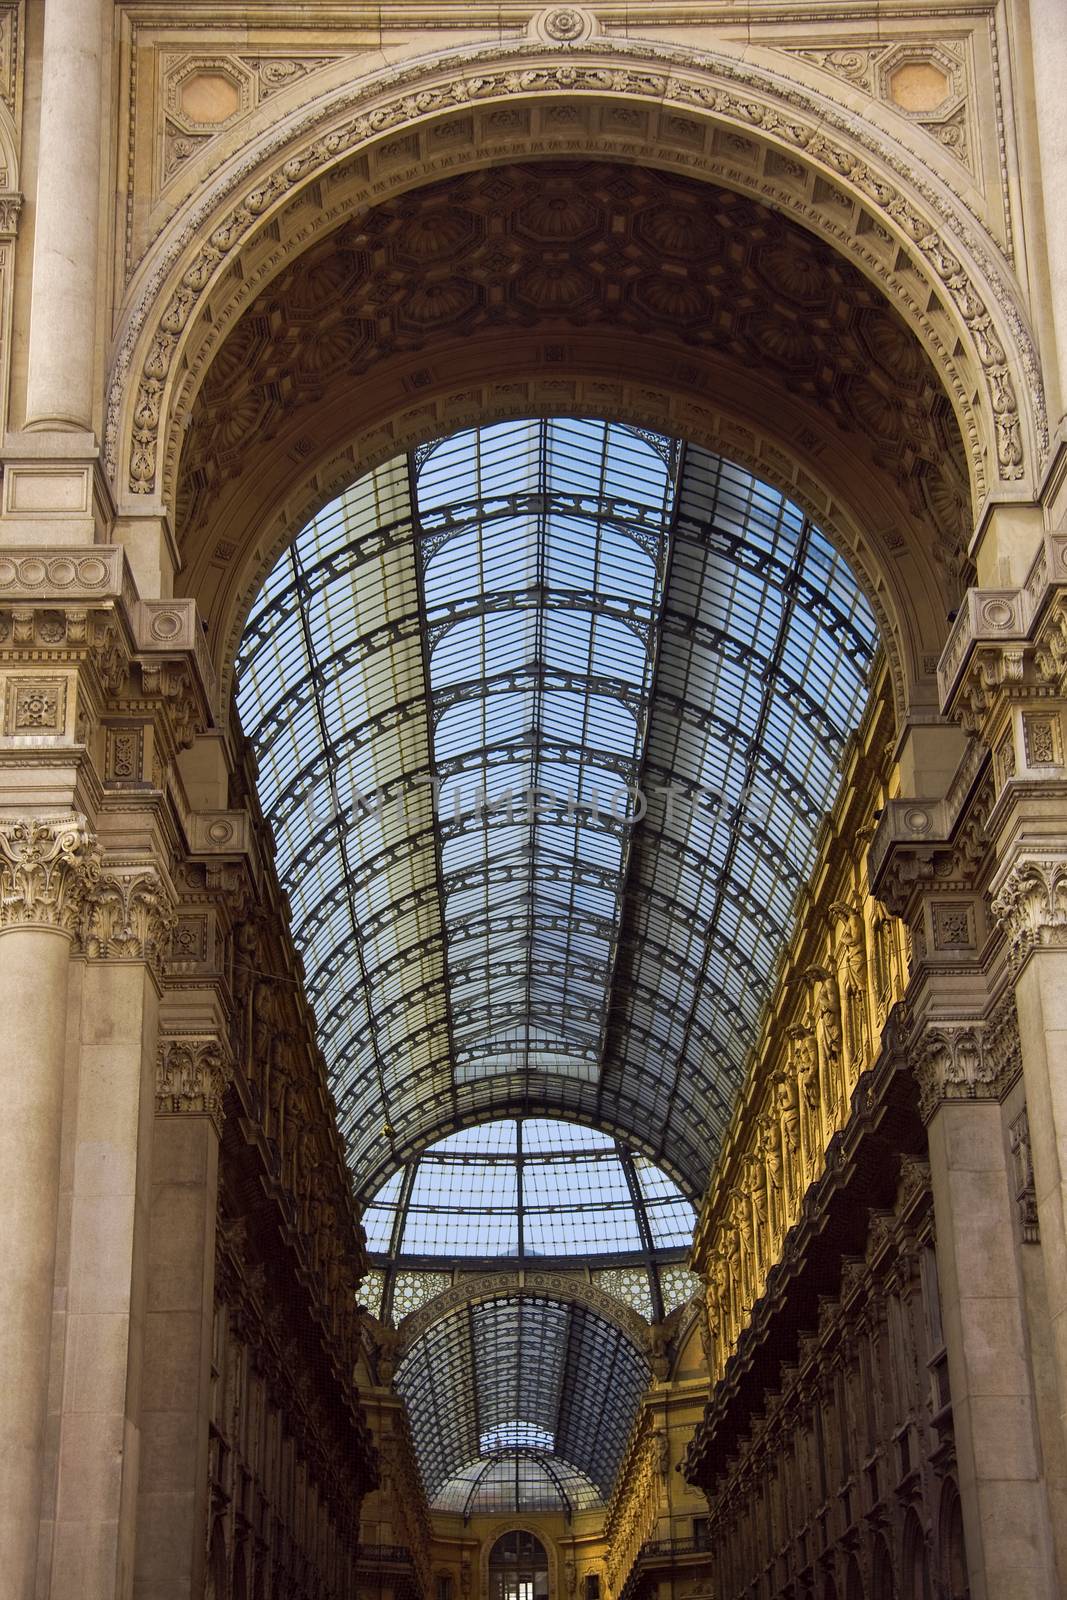 Building of the shopping center gallery Vittorio Emanuele in Milan, Italy.